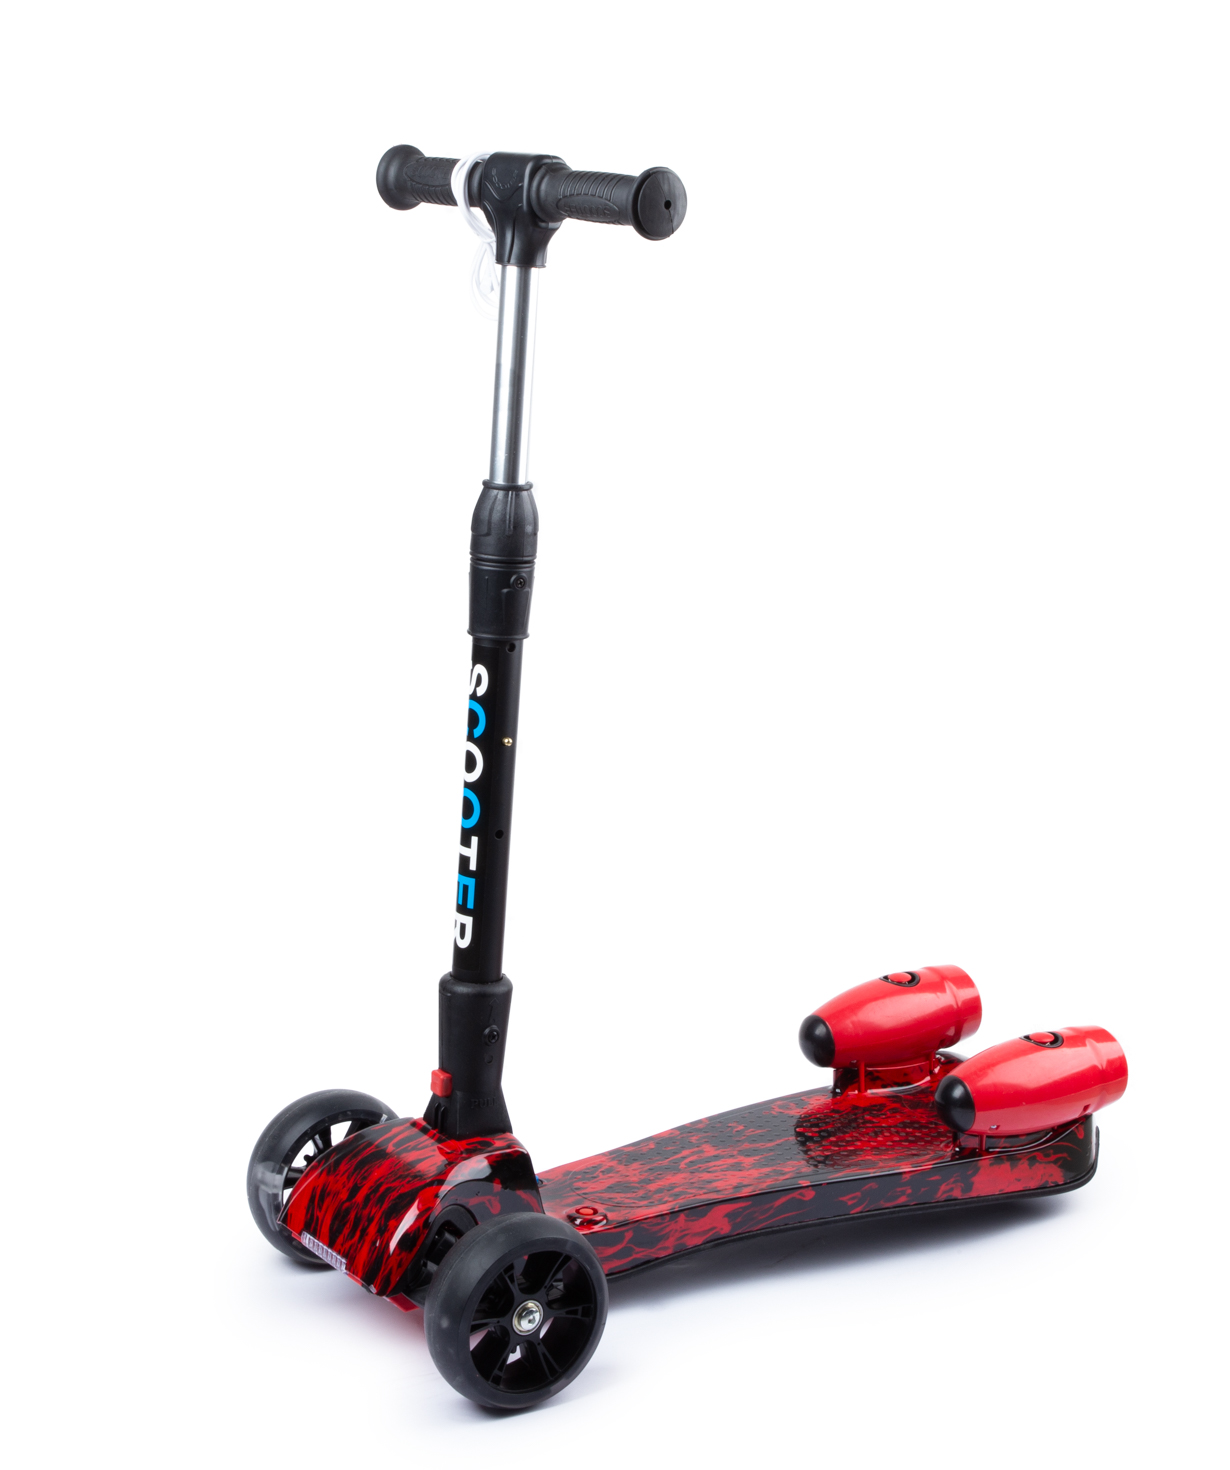 Scooter PE-15083 with light effect, steam and sound signal